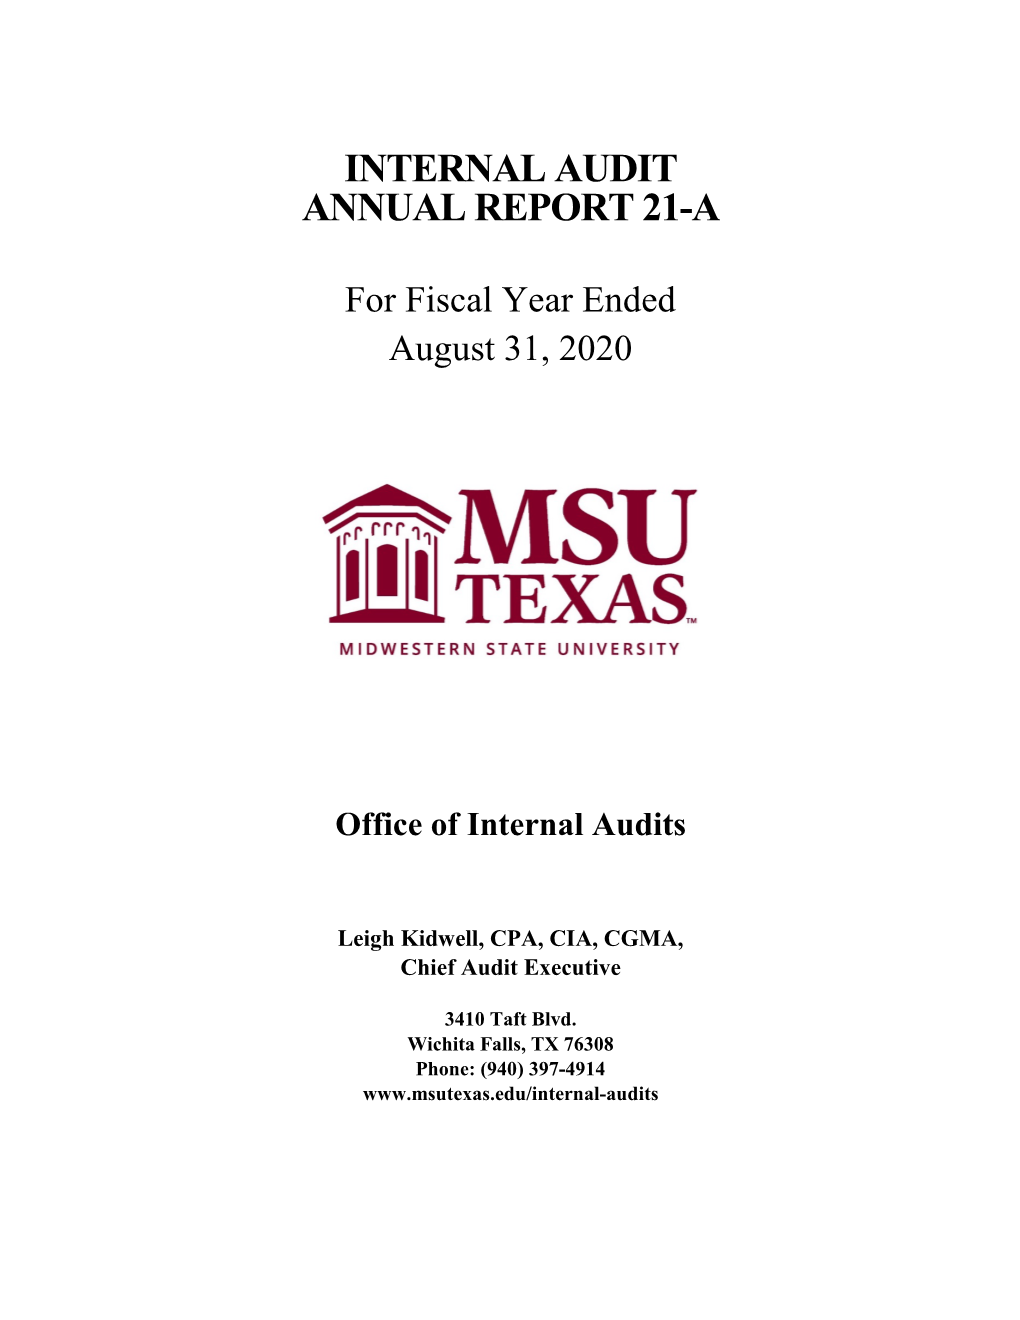 Fiscal Year 2020 Internal Audit Annual Report